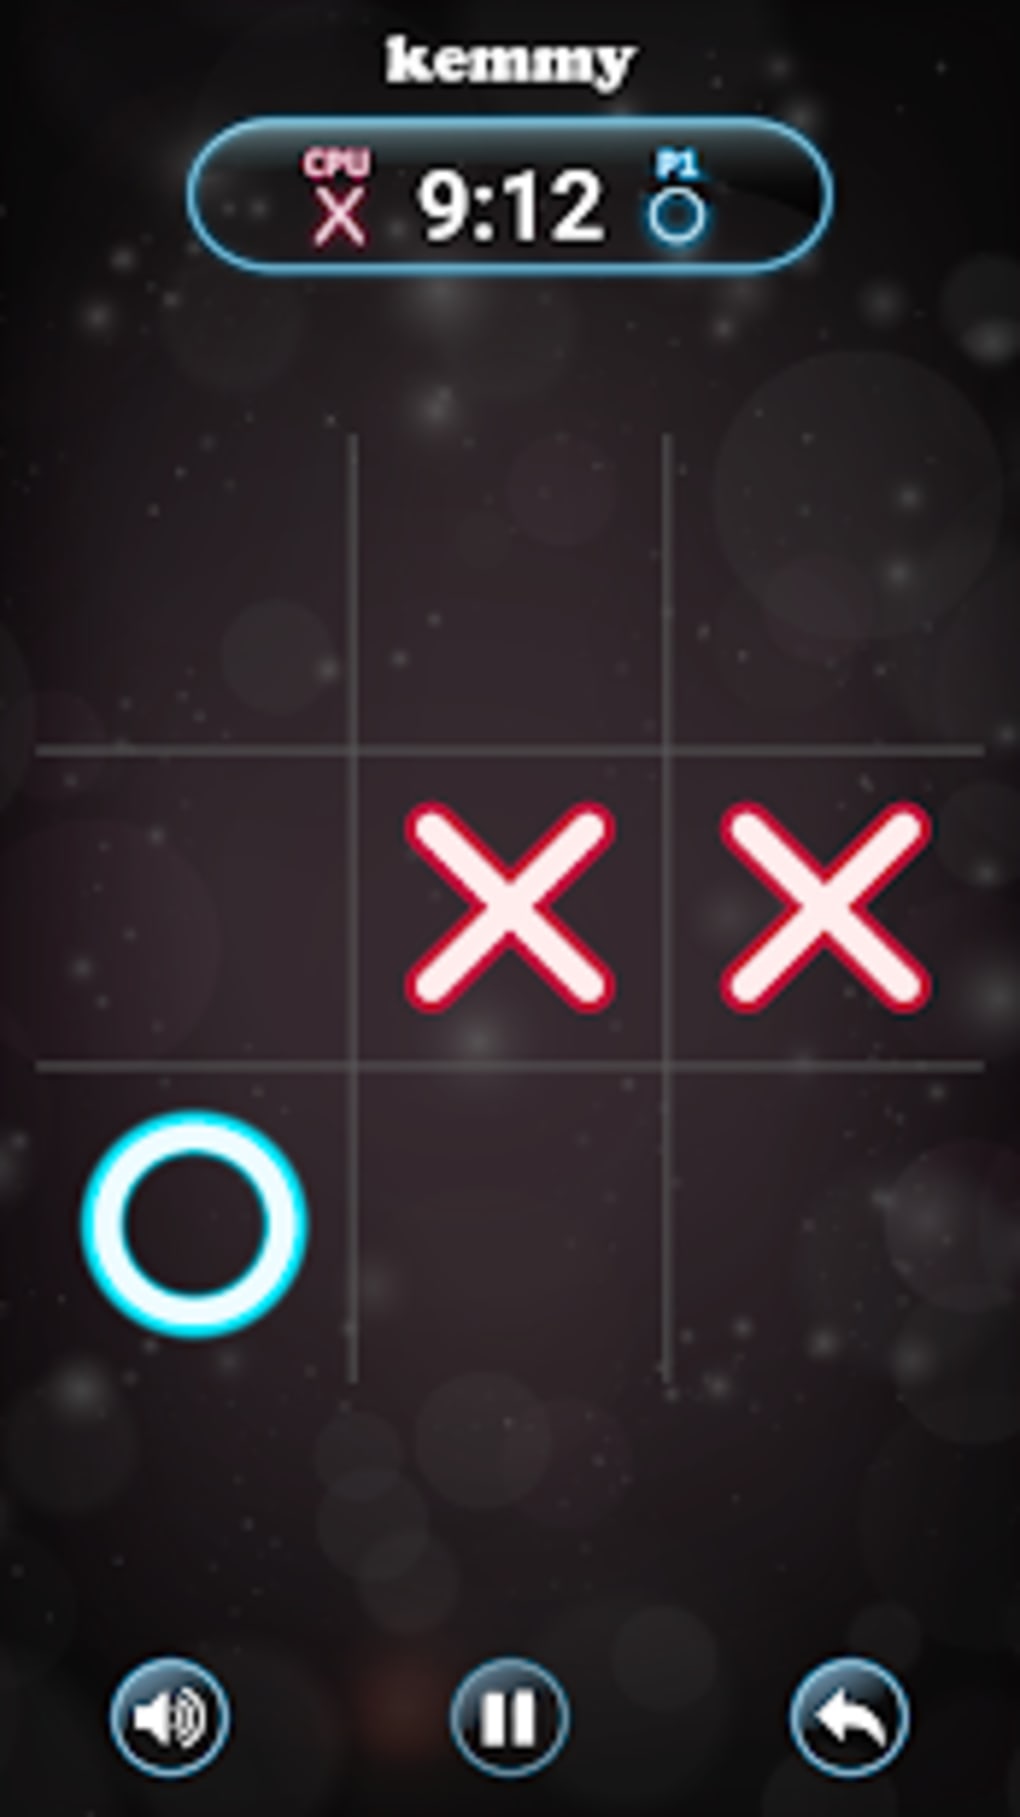 Tic Tac Toe glow - Free Puzzle Game for Android - Download the APK